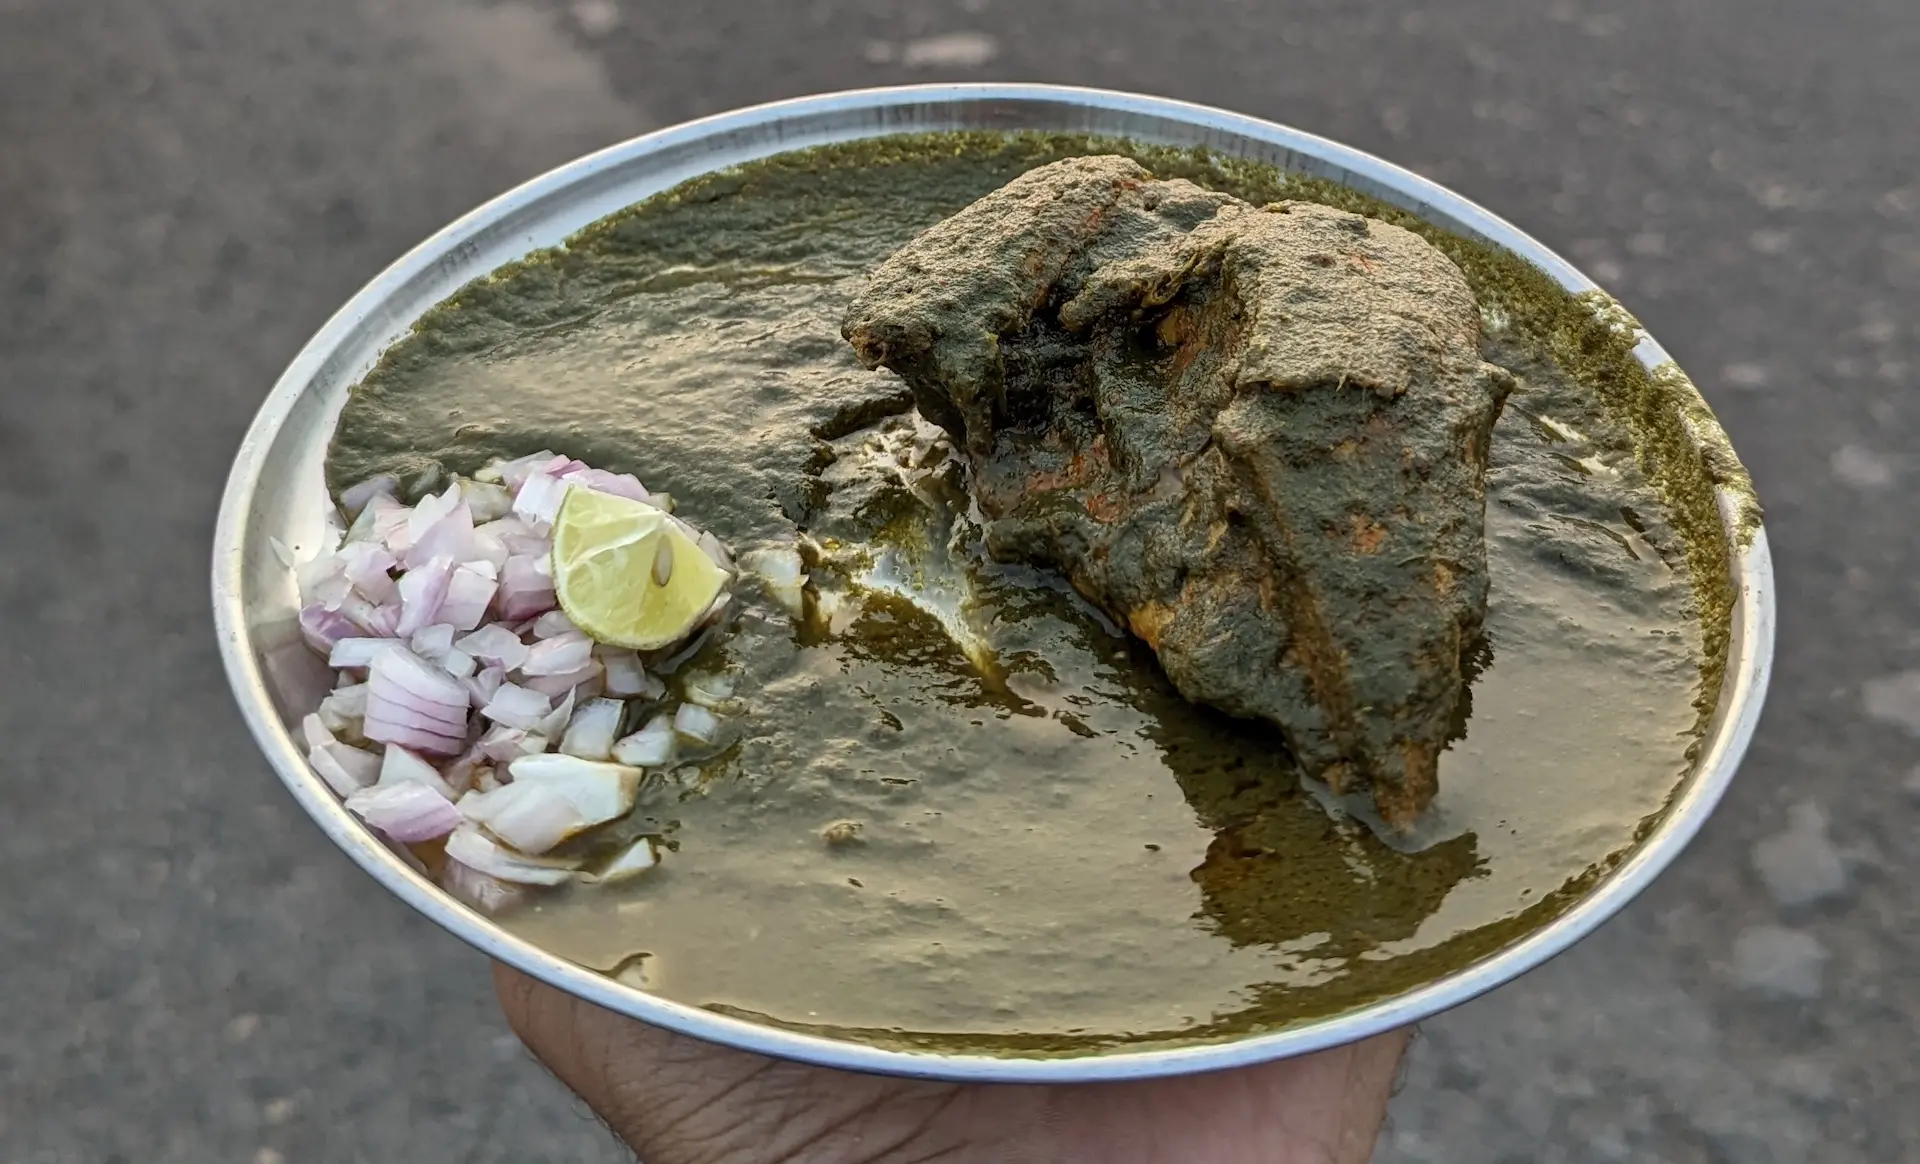 Goa’s Sizzling Tale: The Chicken Cafreal Adventure